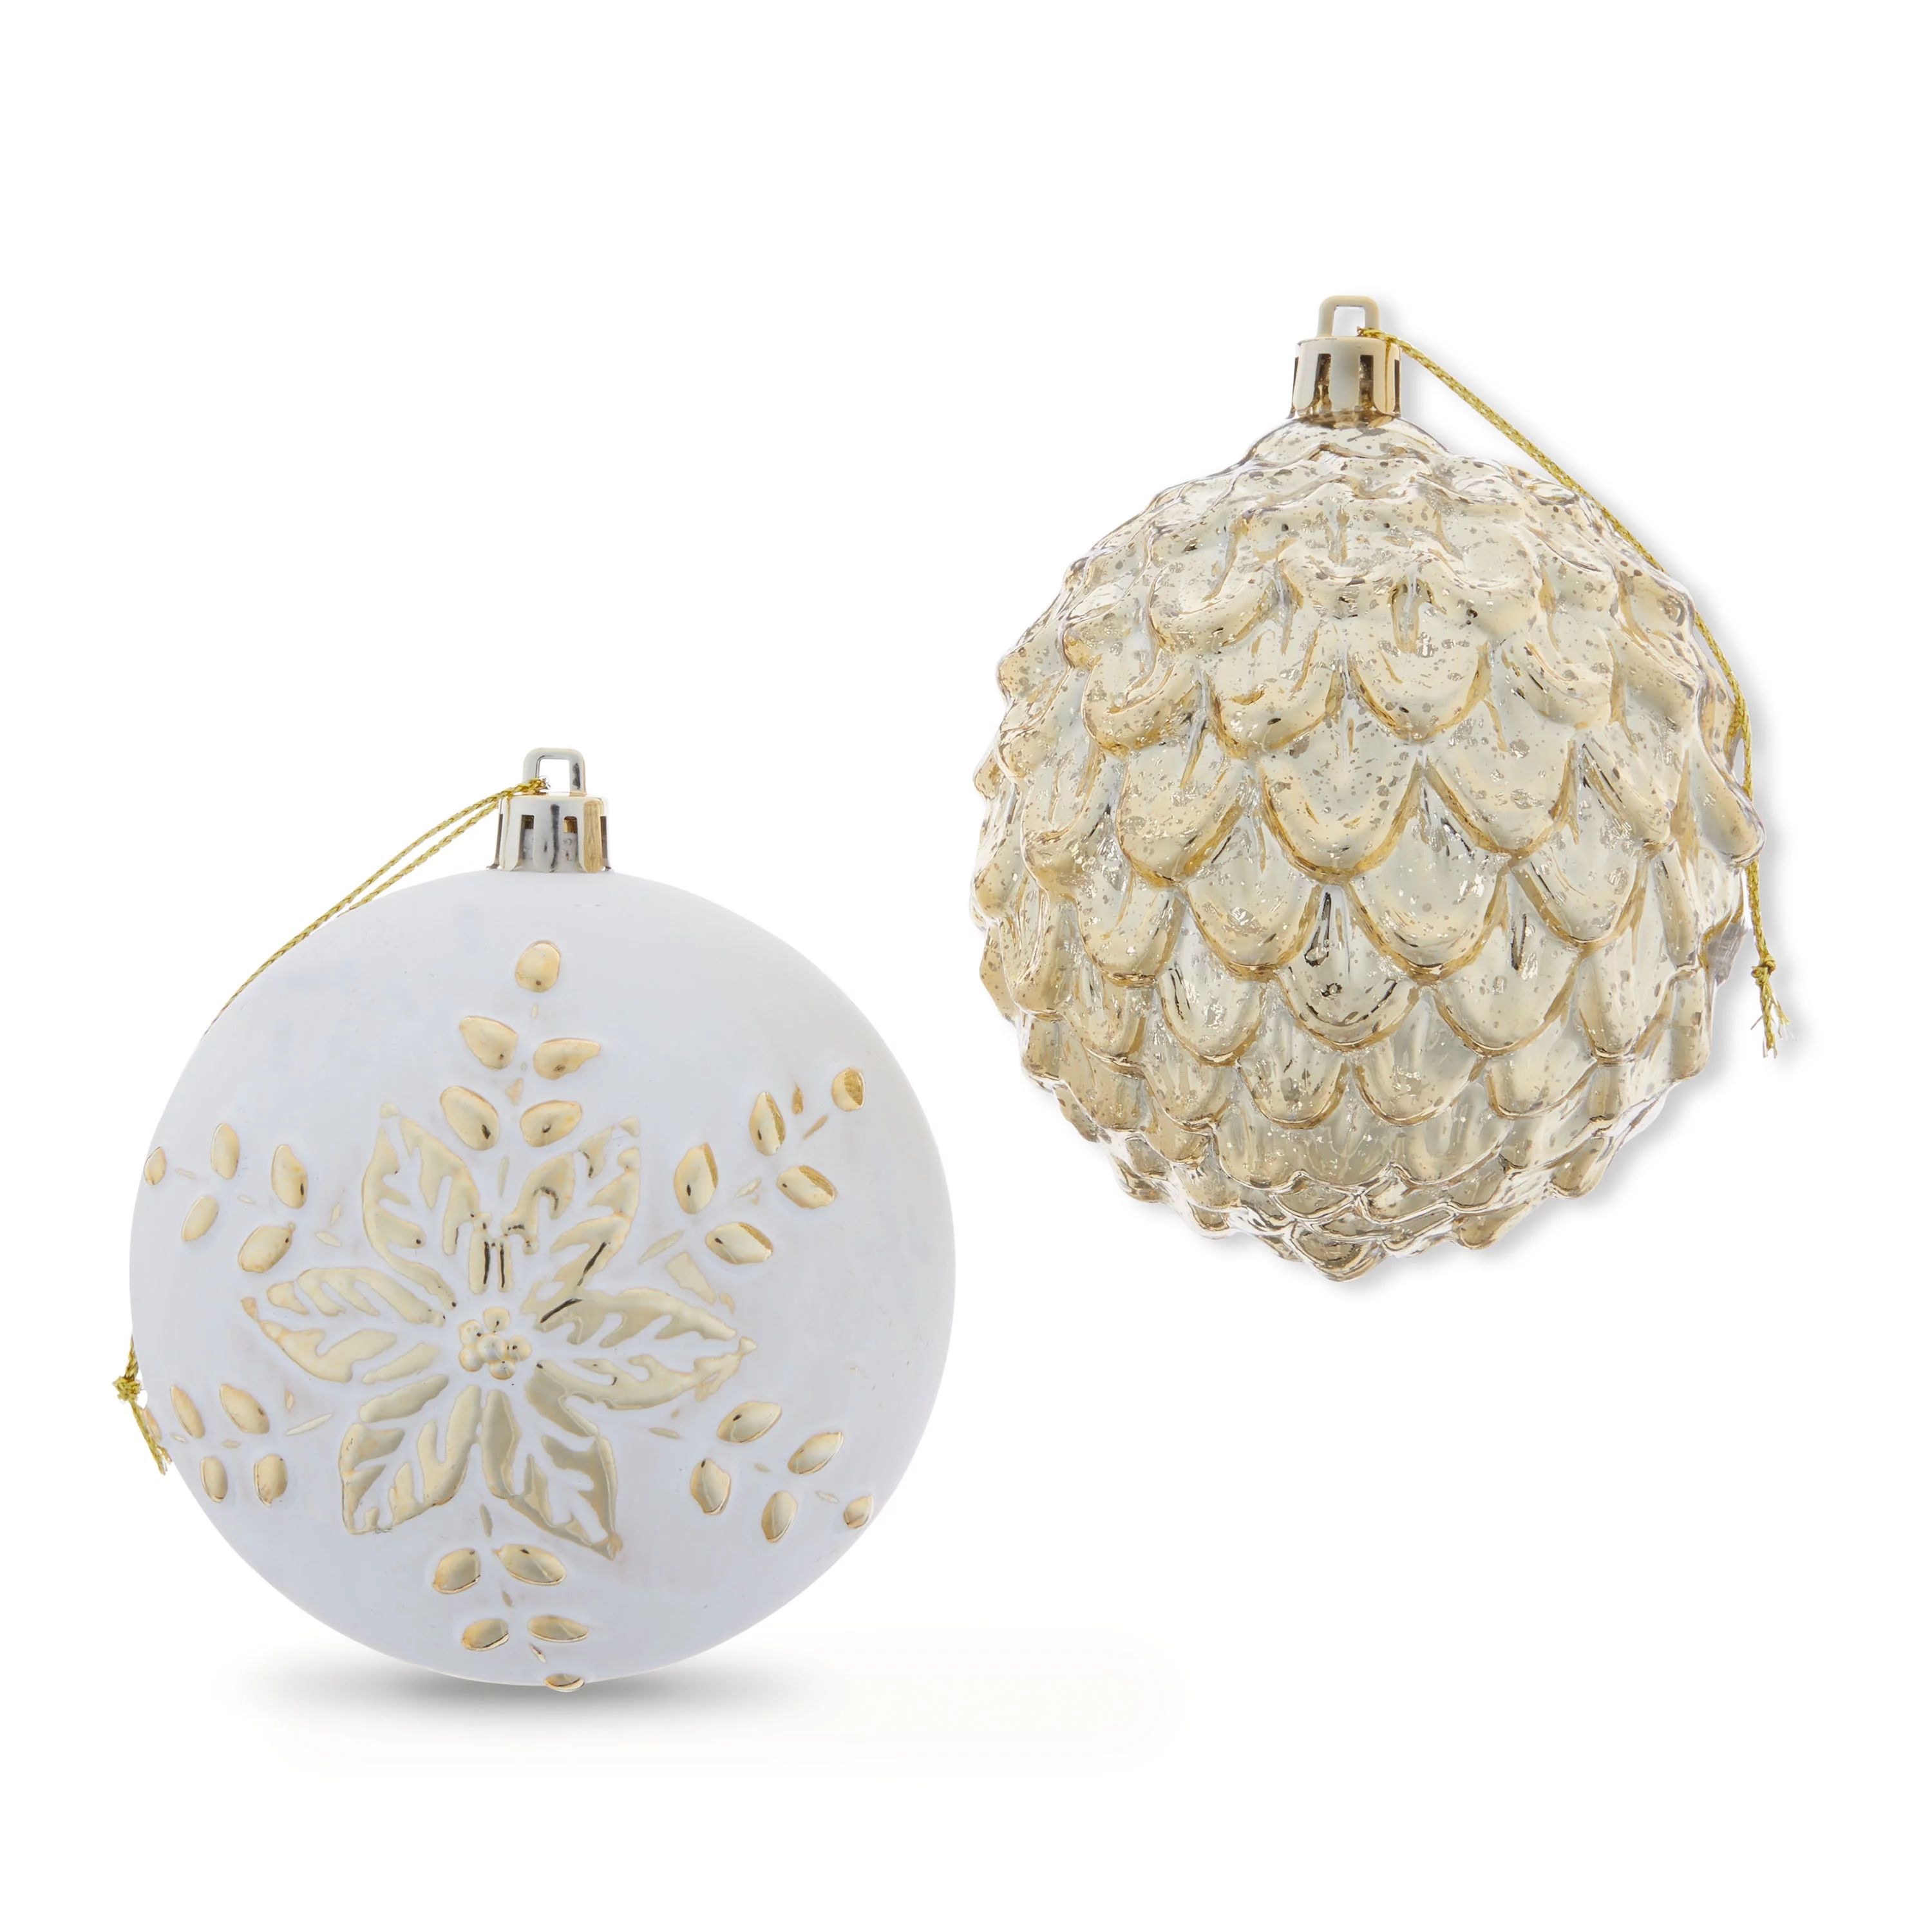 Gold Mercury Pinecone Shape and Poinsettia Pattern Shatterproof Ball Ornament, 90 mm, 8 Count, by... | Walmart (US)